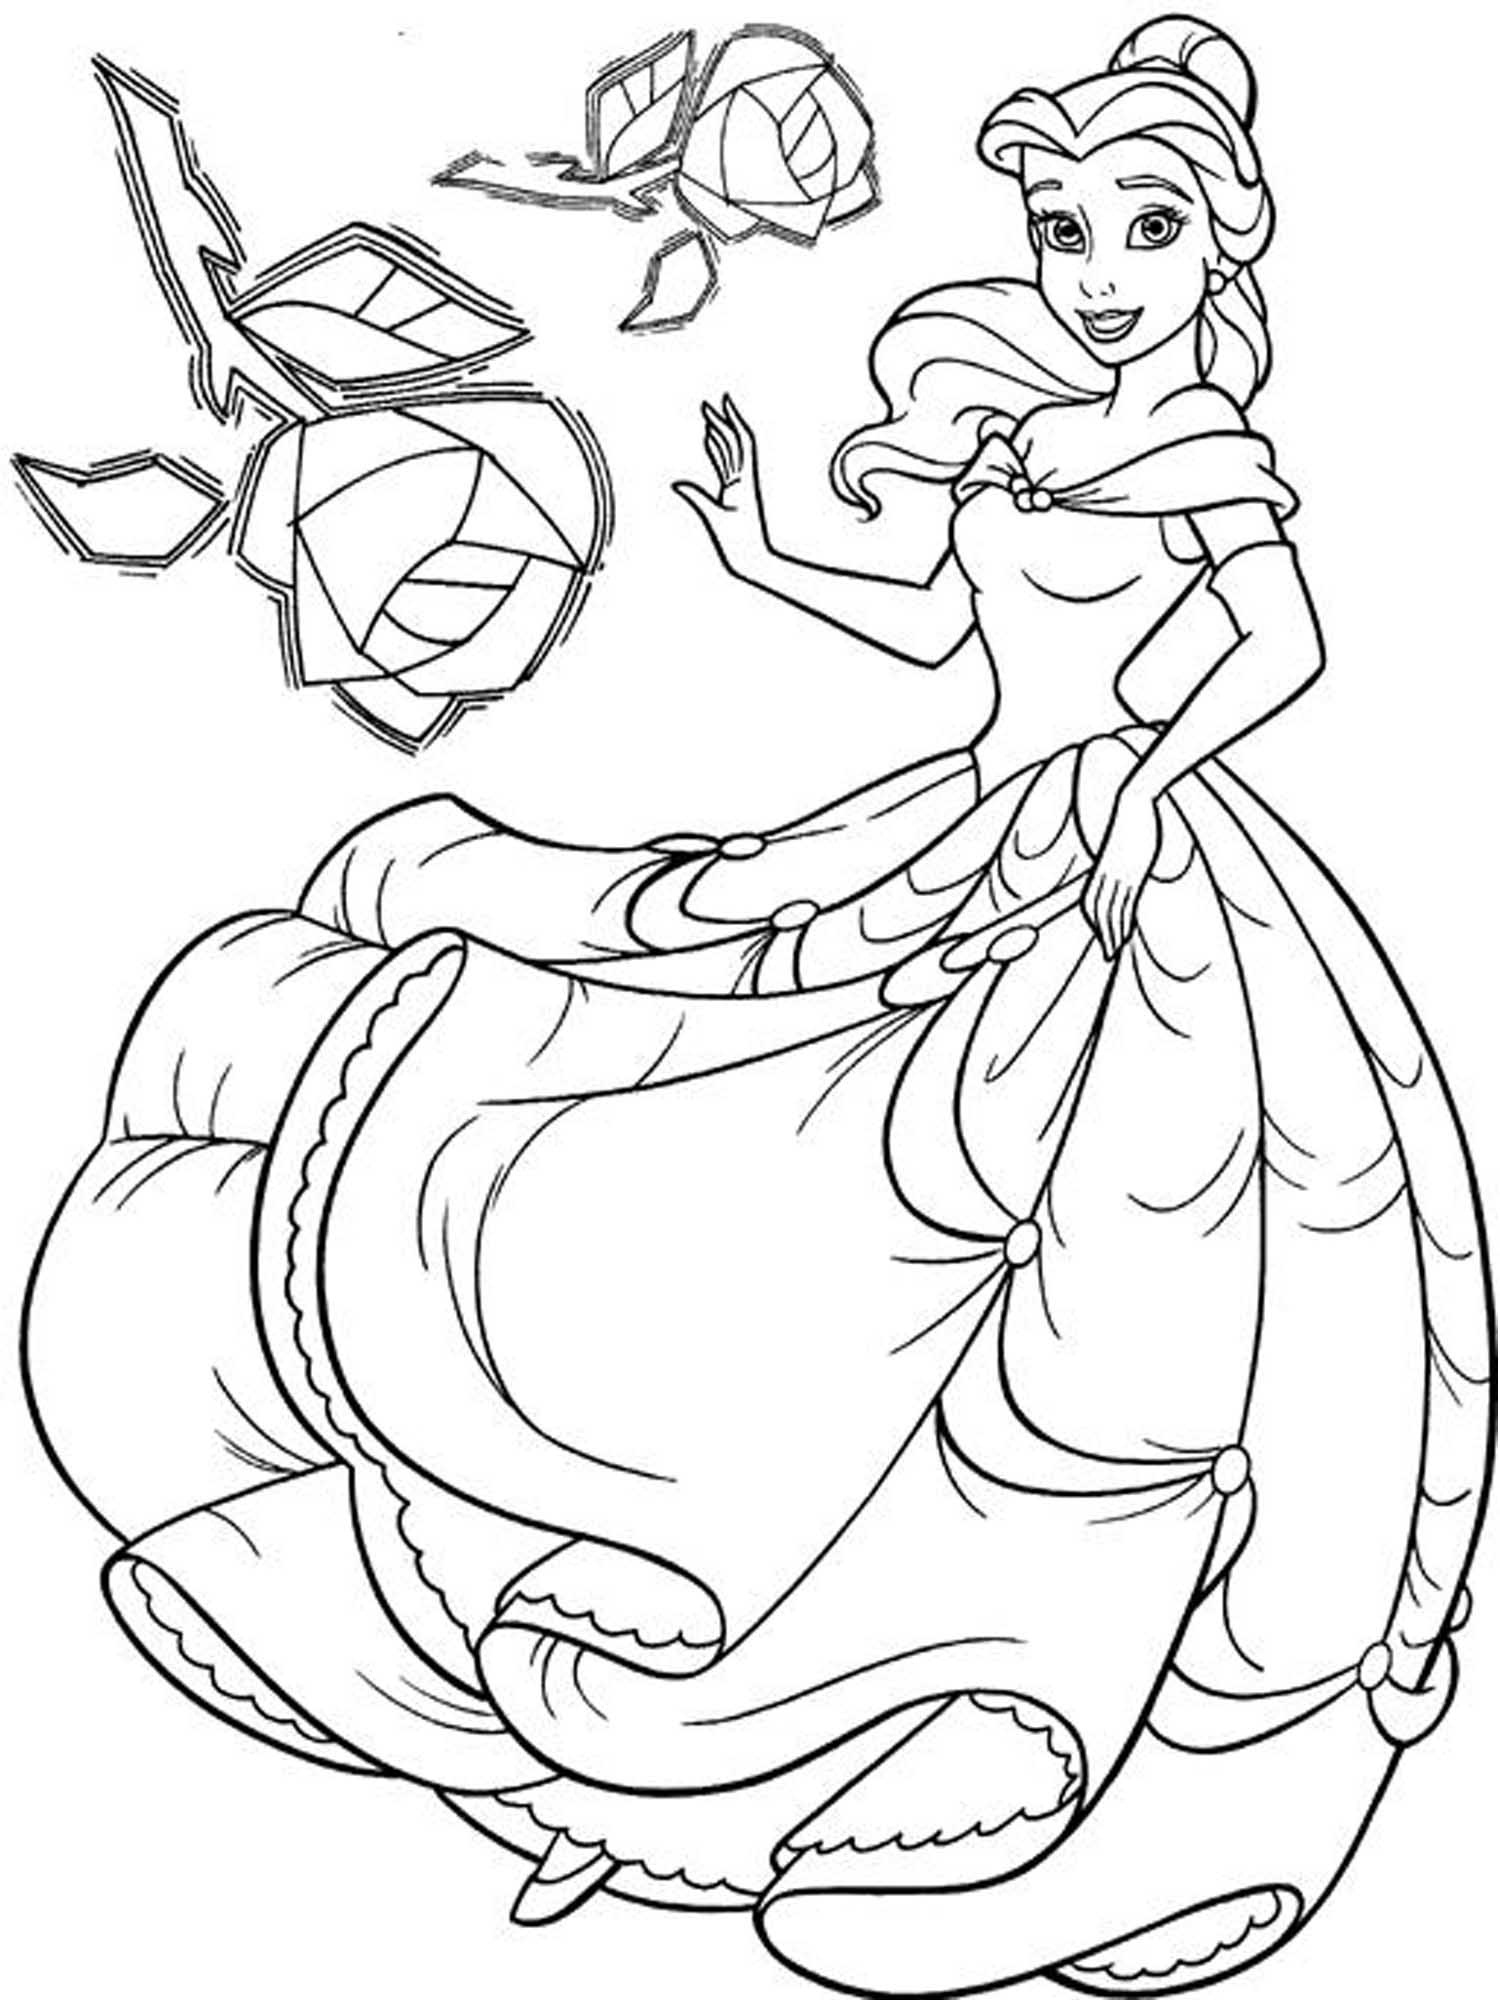 Download Free Printable Belle Coloring Pages For Kids